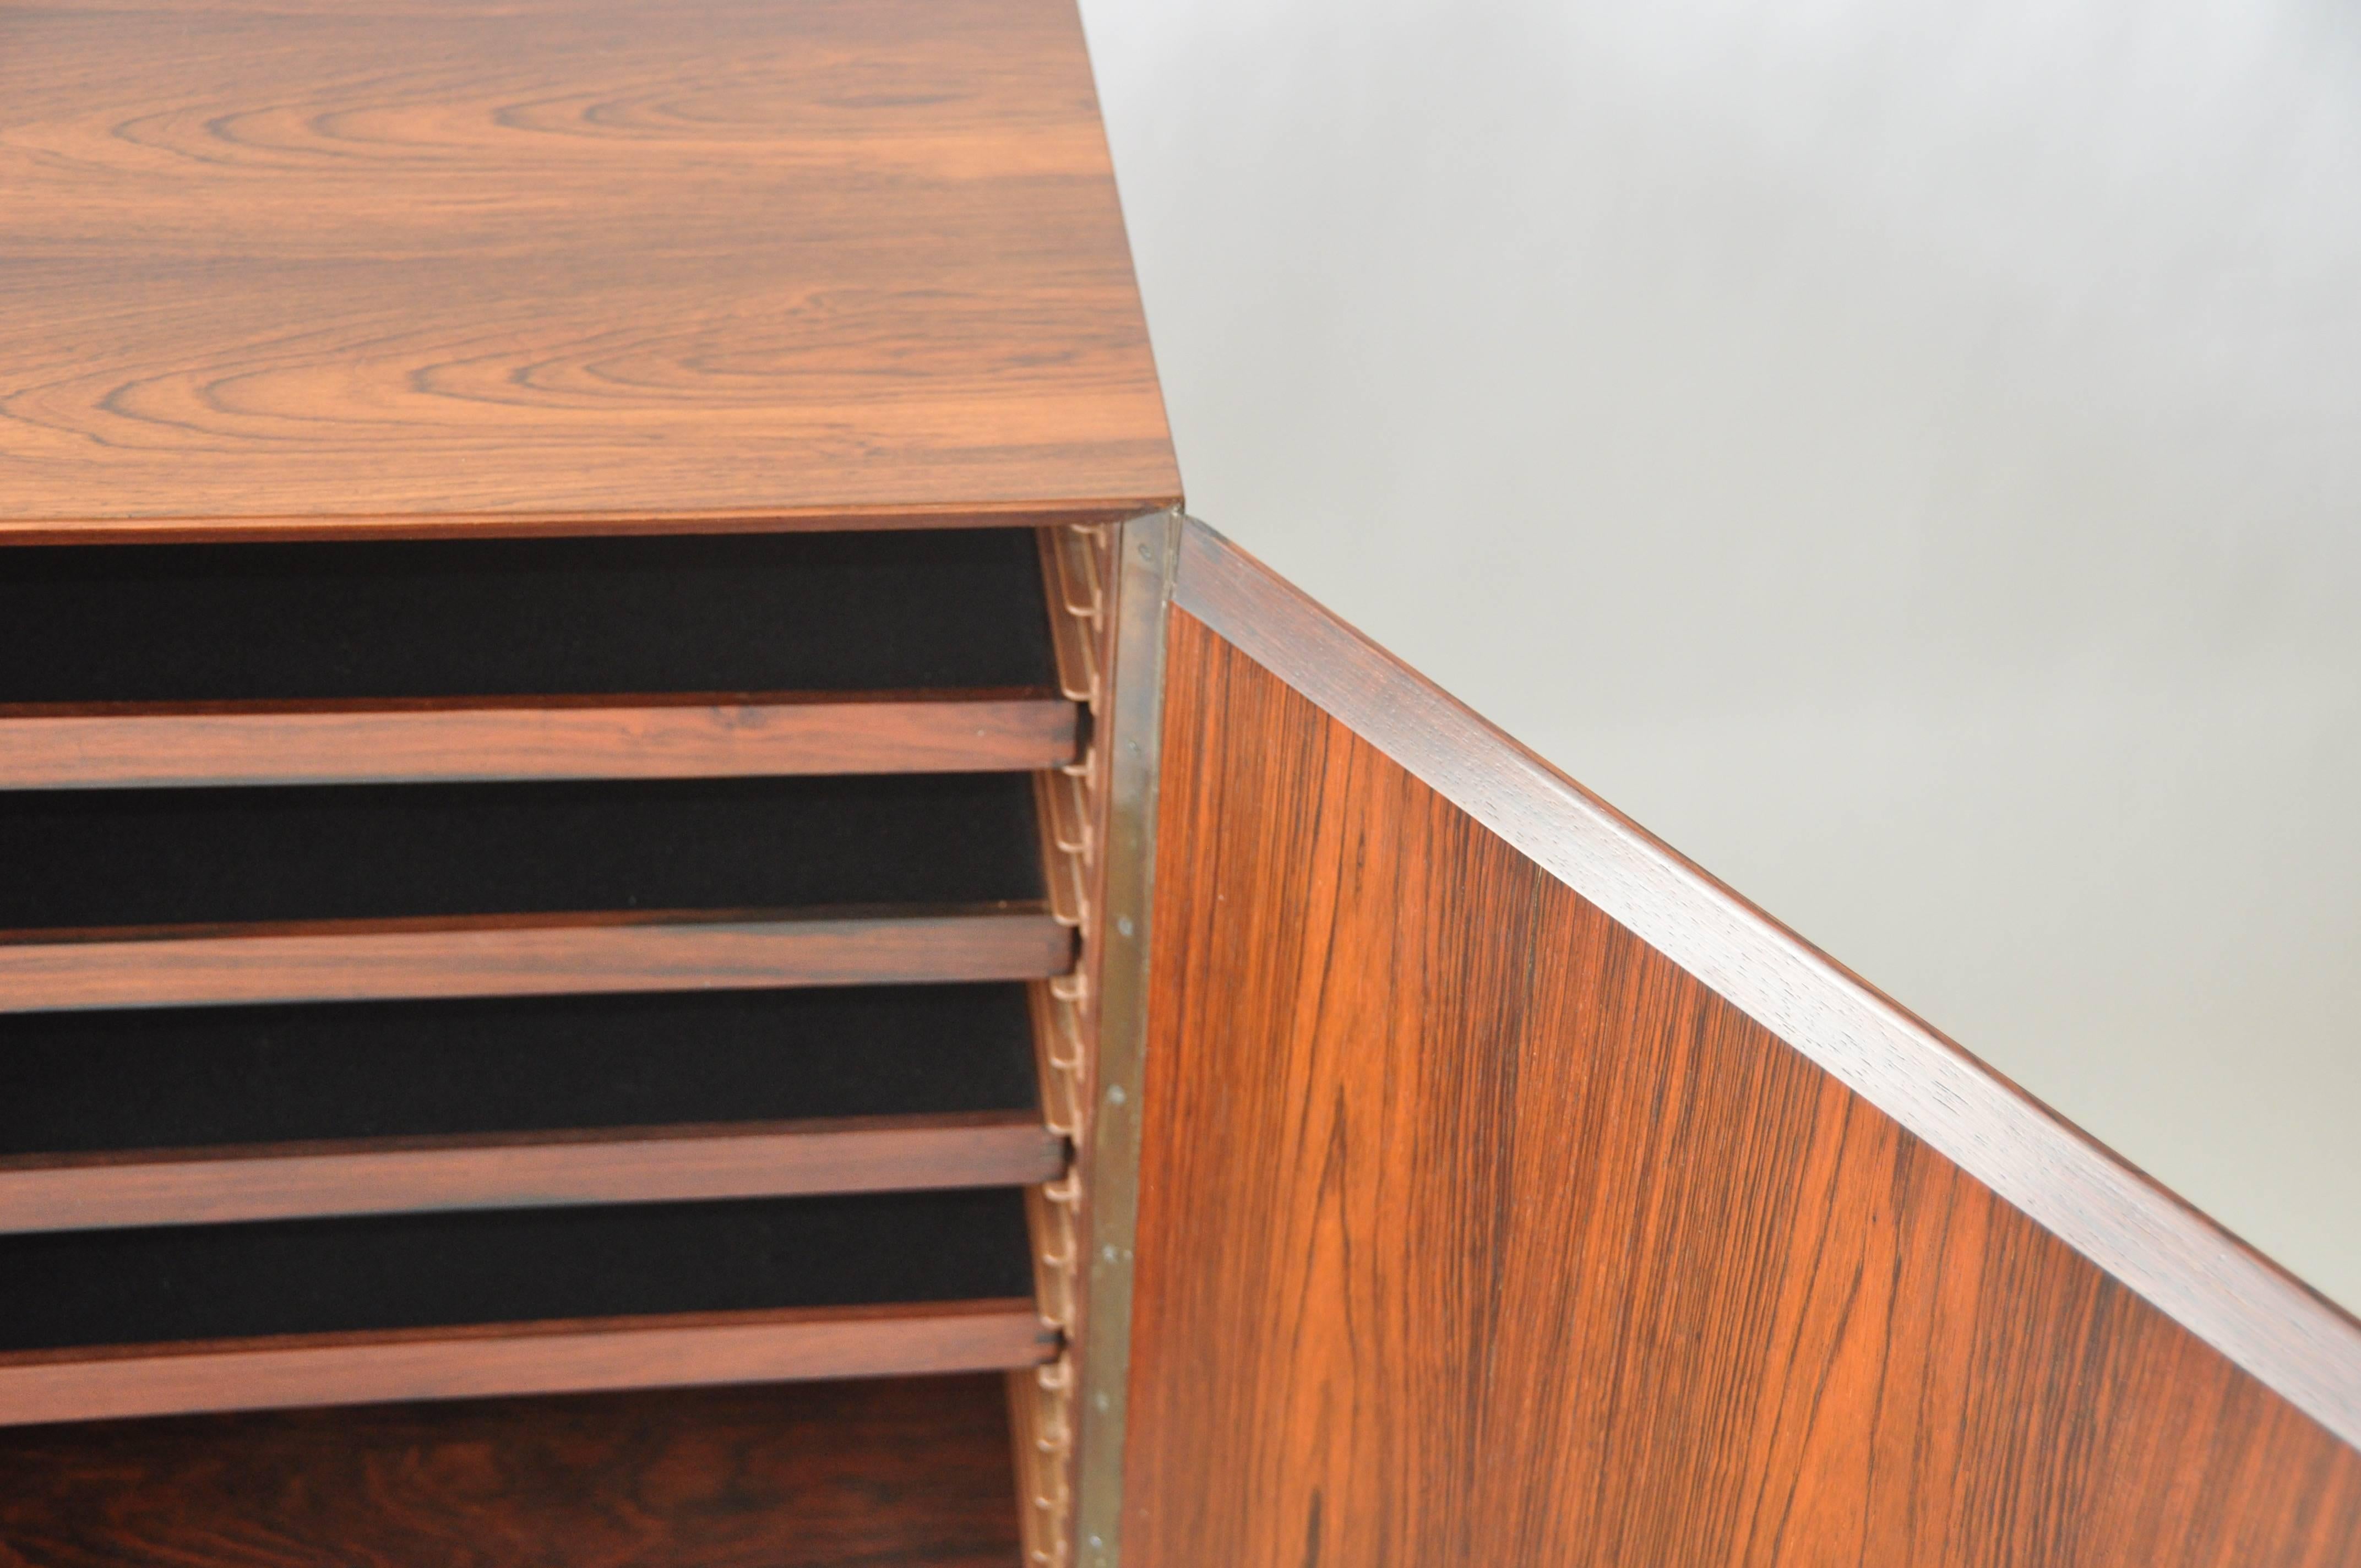 Steel Rosewood Credenza by Poul Norreklit